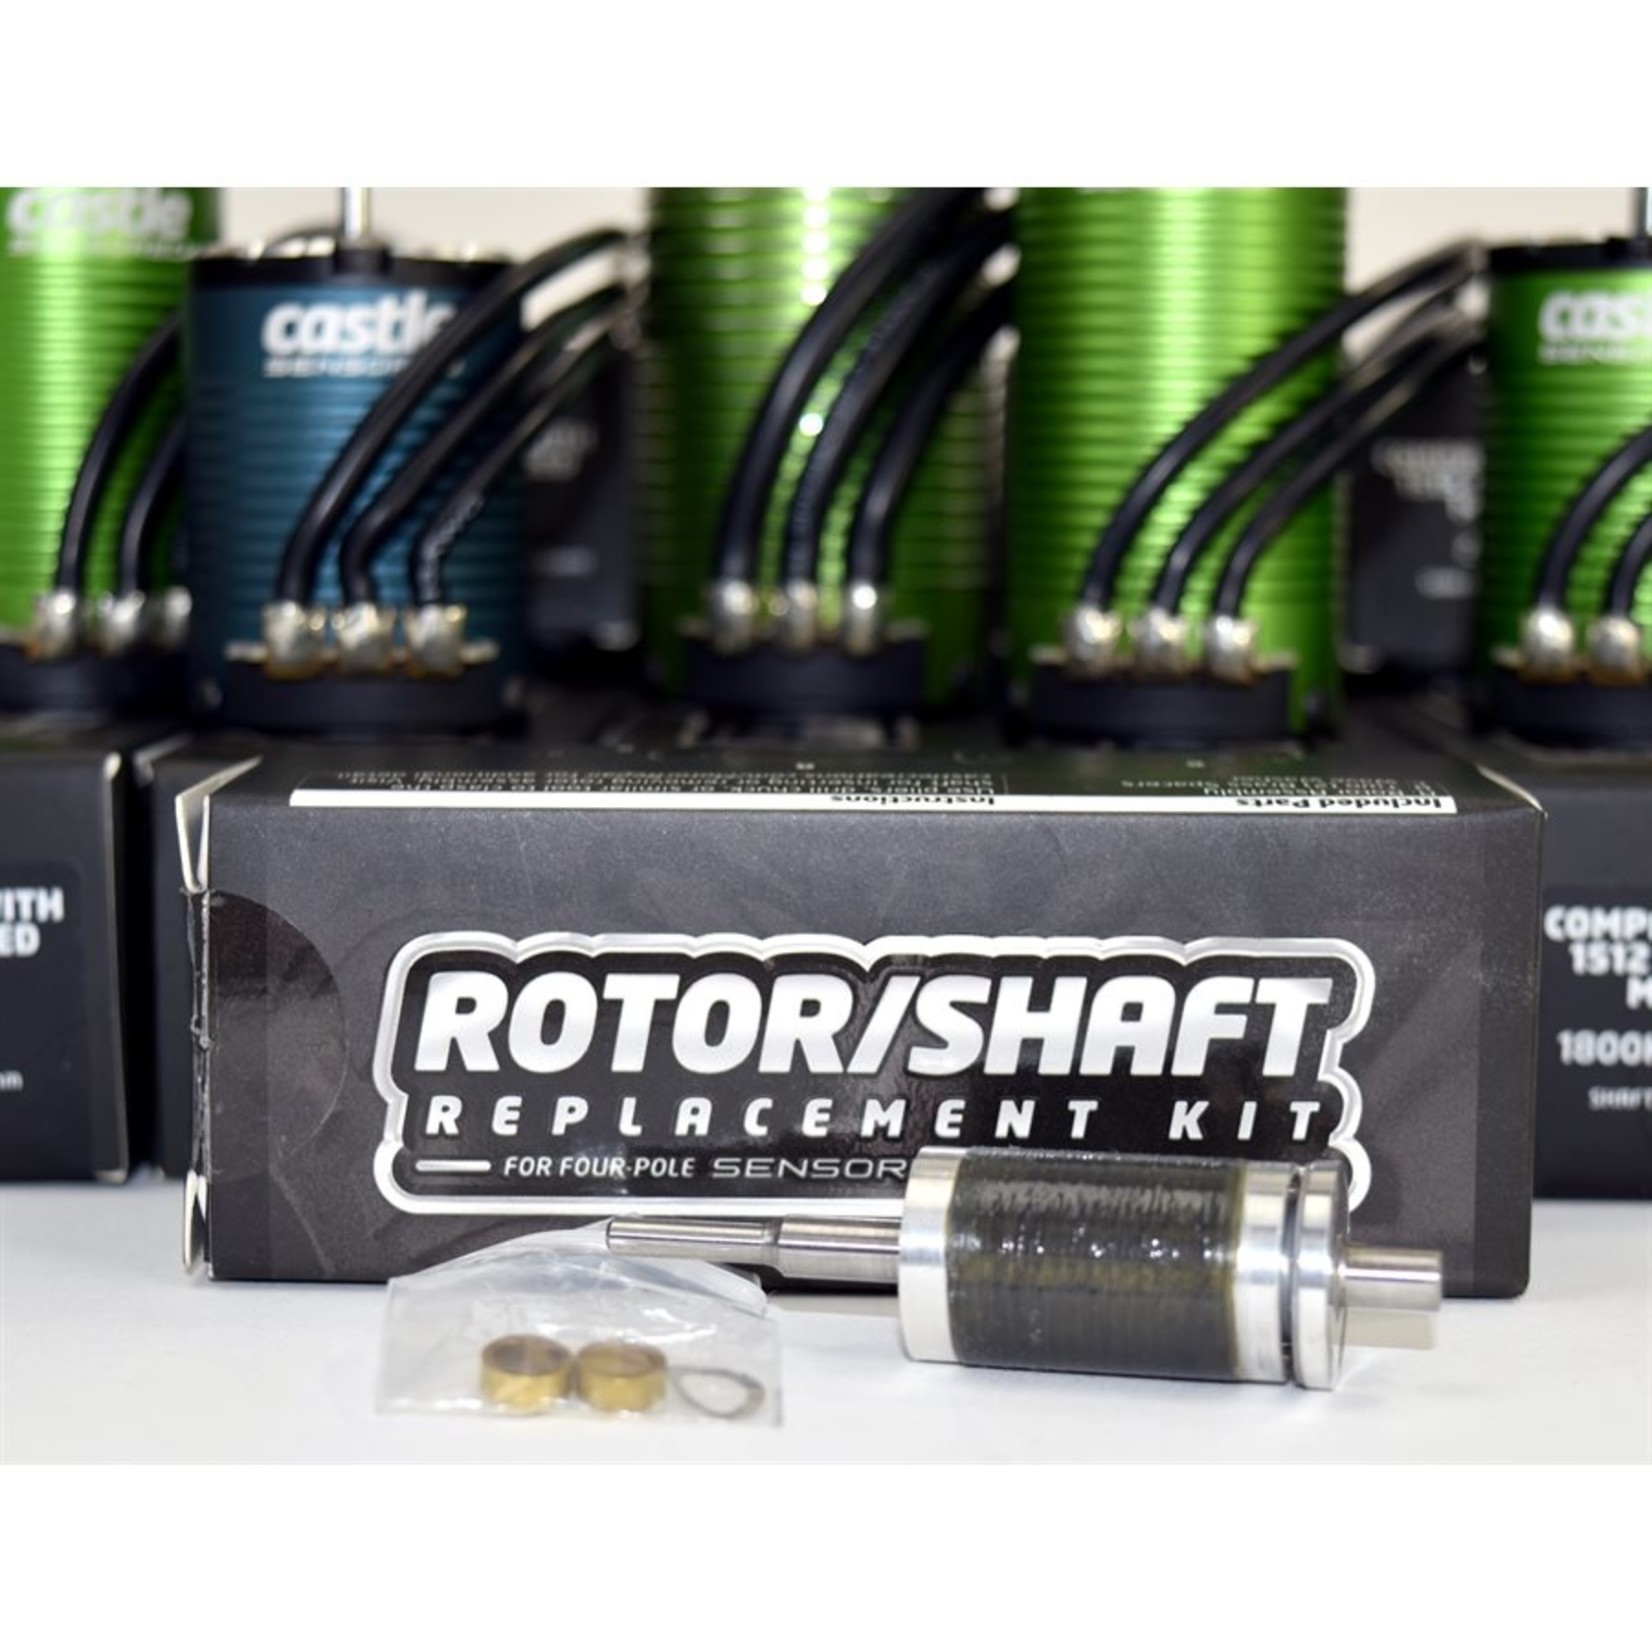 Castle Creations Rotor/Shaft Replacement Kit 1410-3800Kv 5mm